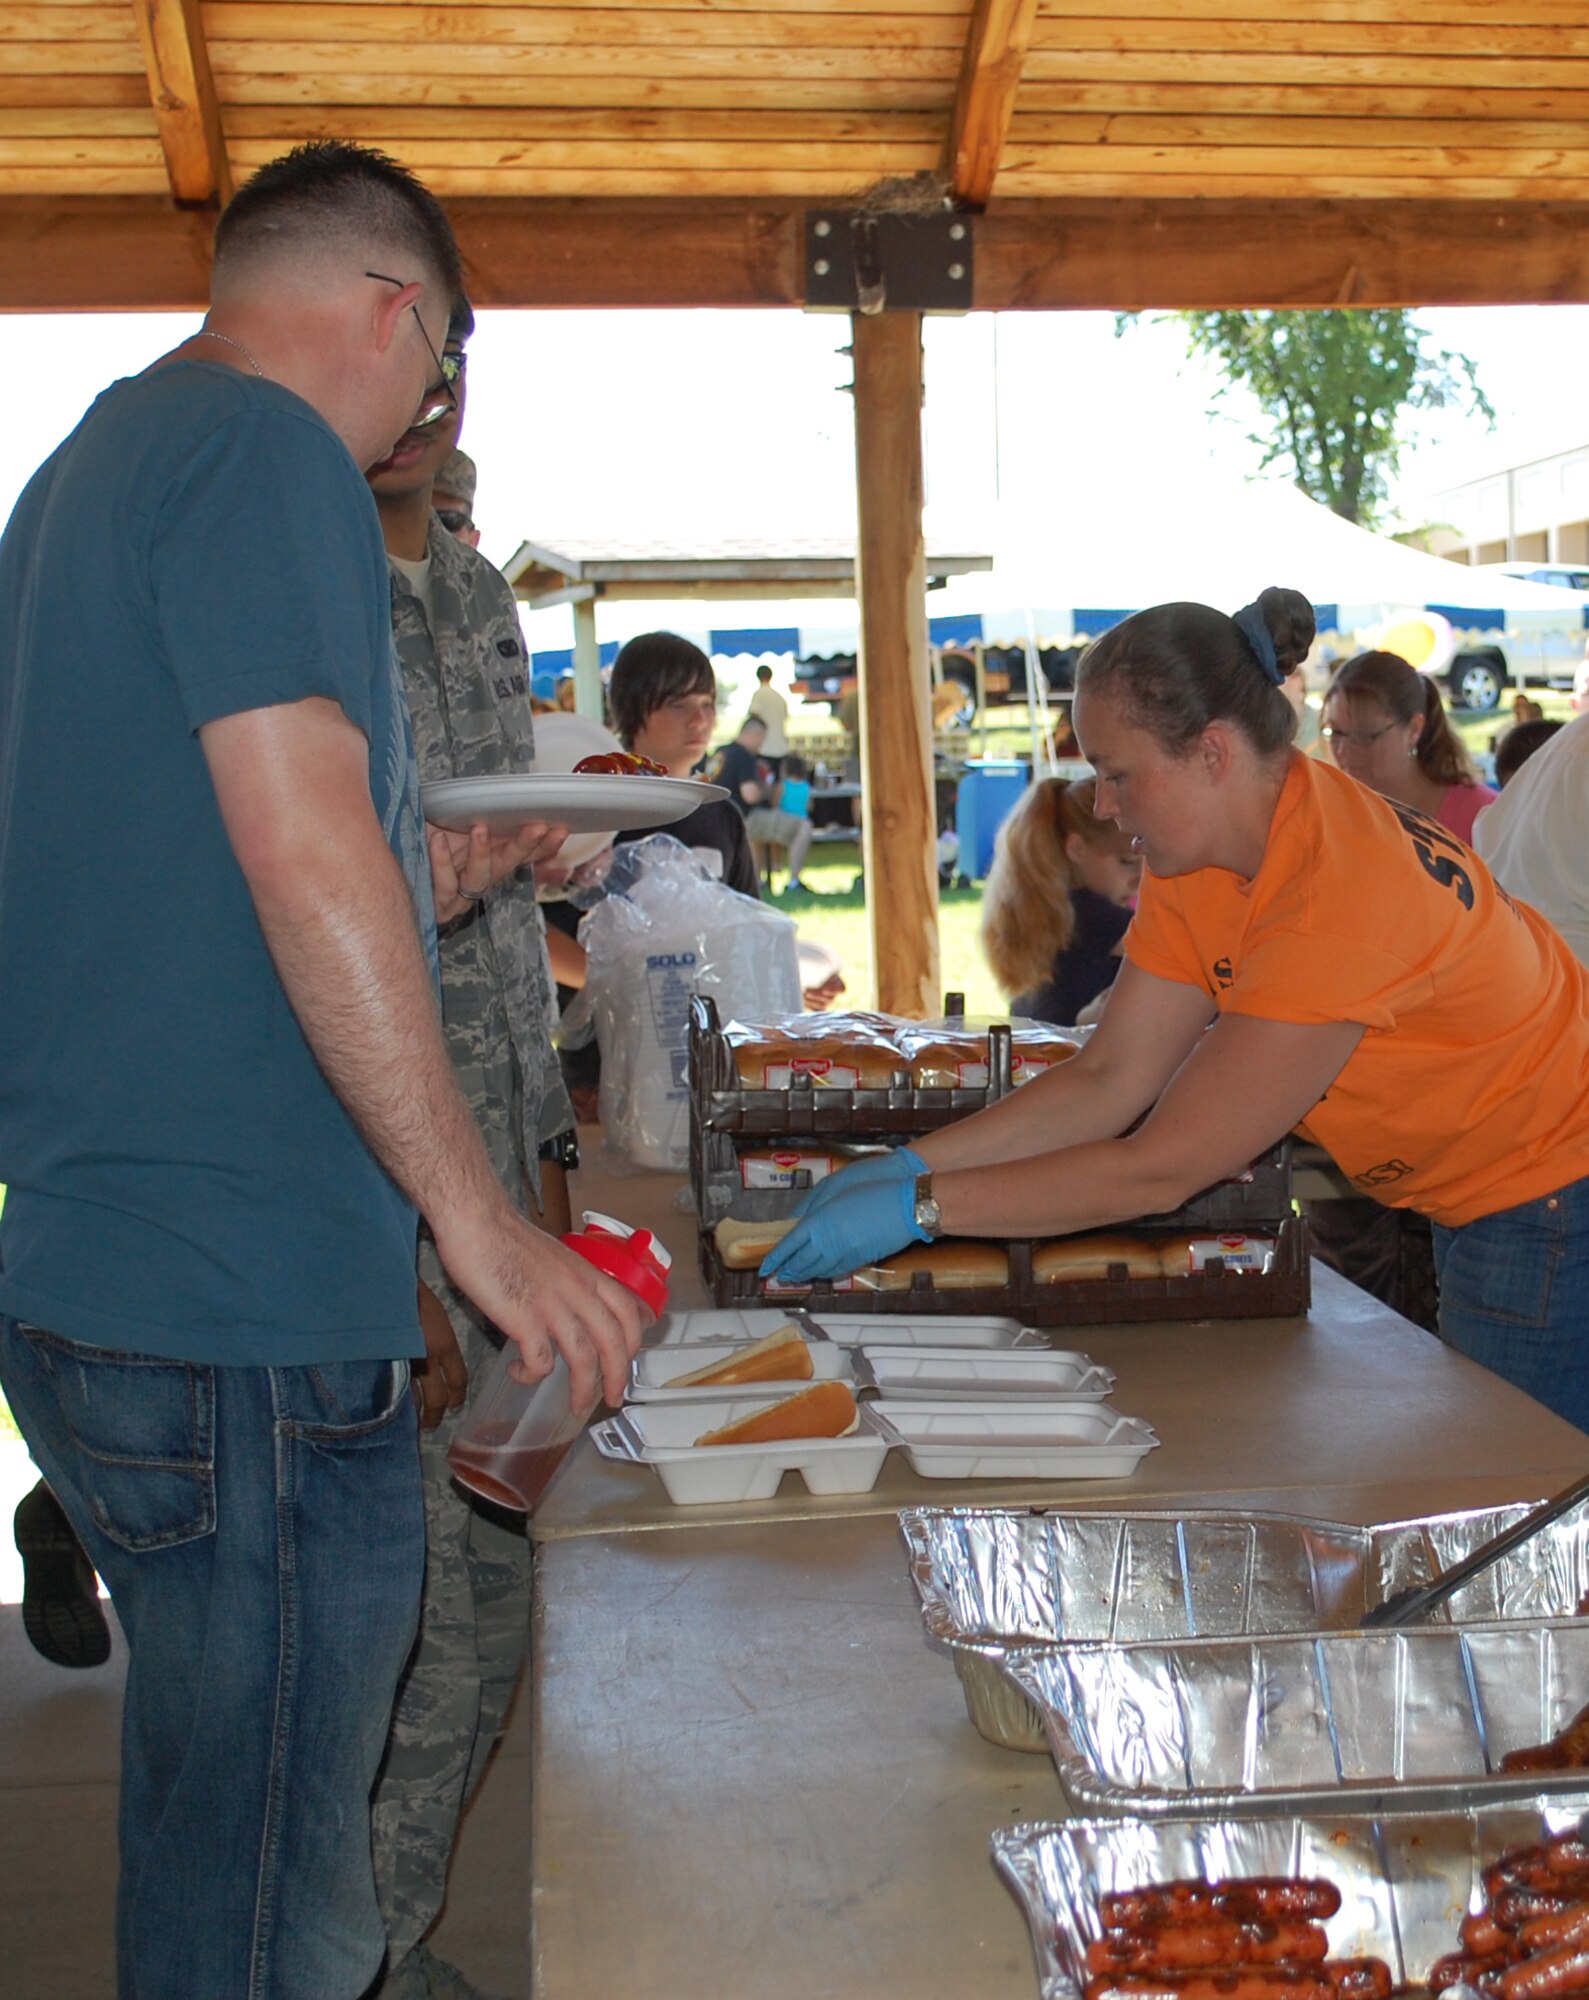 Rachel Kofoed helps some military members get their free lunch to go at the base picnic July 1. The event took place from 11 a.m. to 3 p.m. in the area in and around Sun Plaza Park. (U.S. Air Force photo/Valerie Mullett)